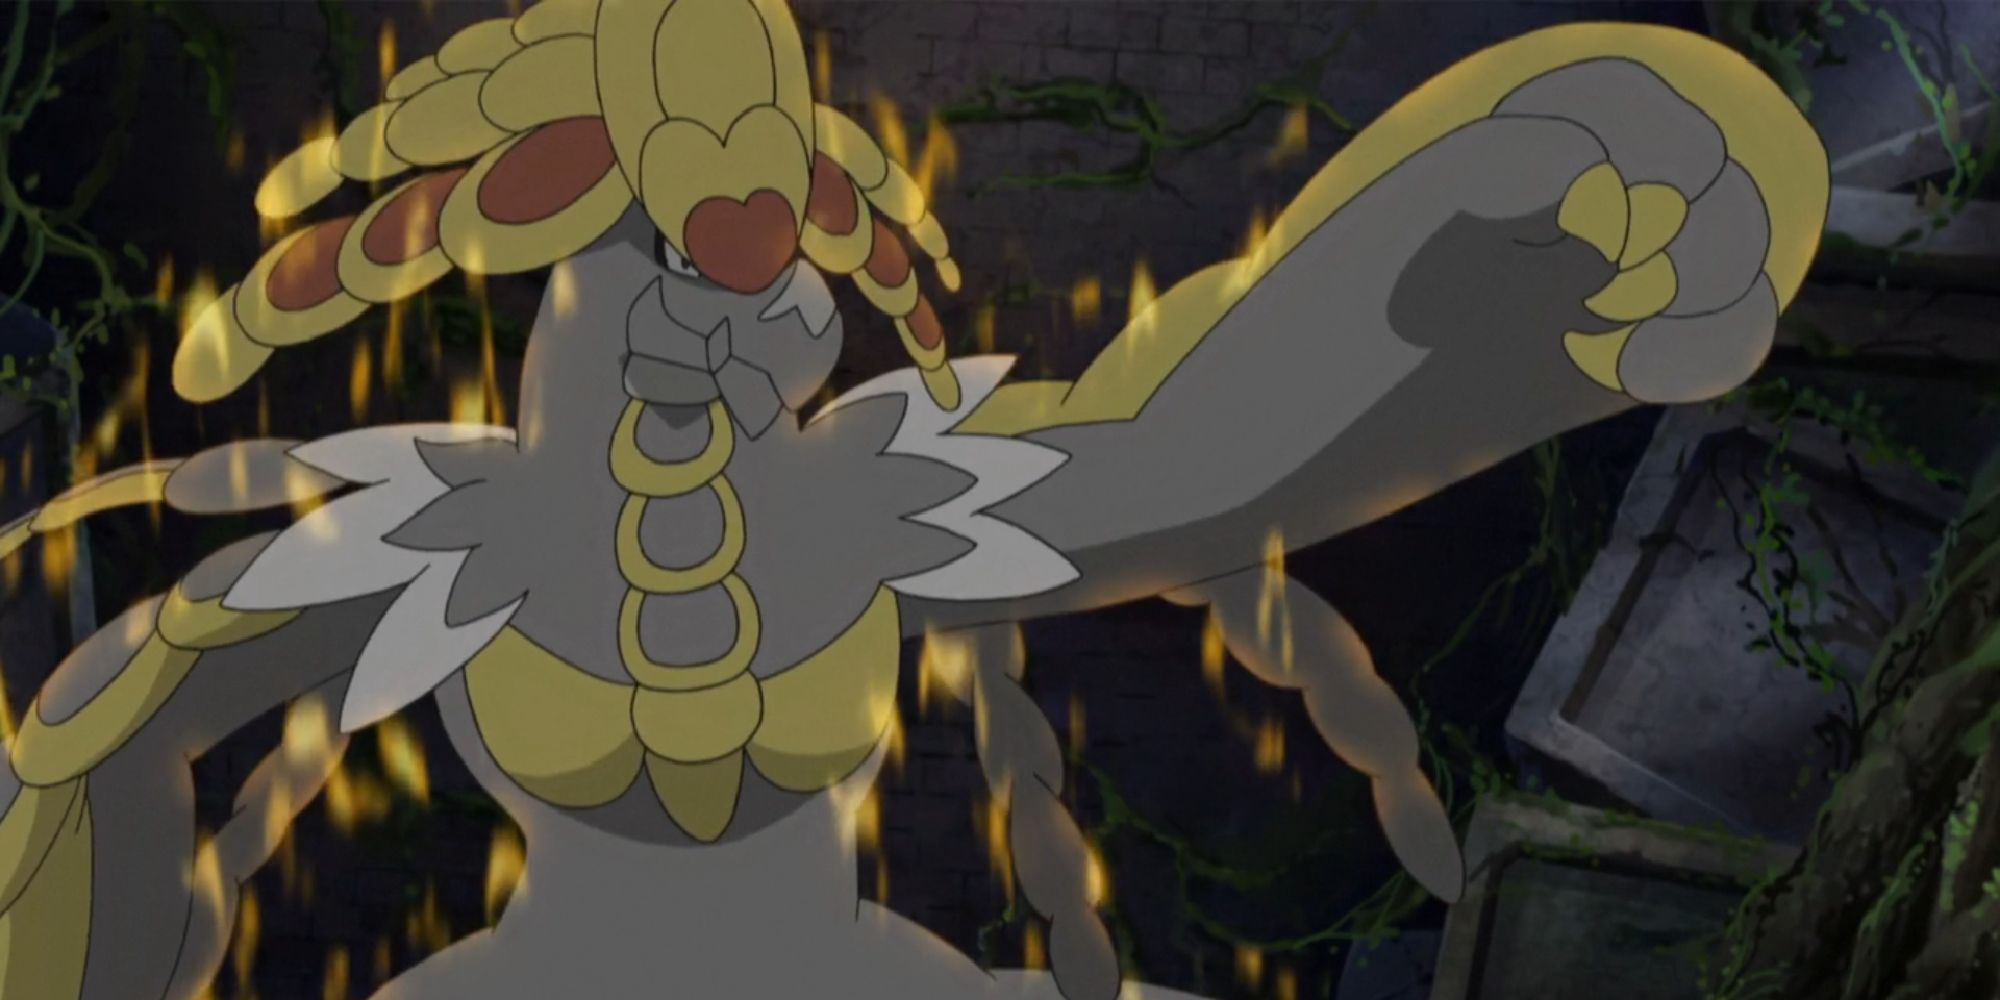 Kommo-o glimmering with Totem energy in the anime